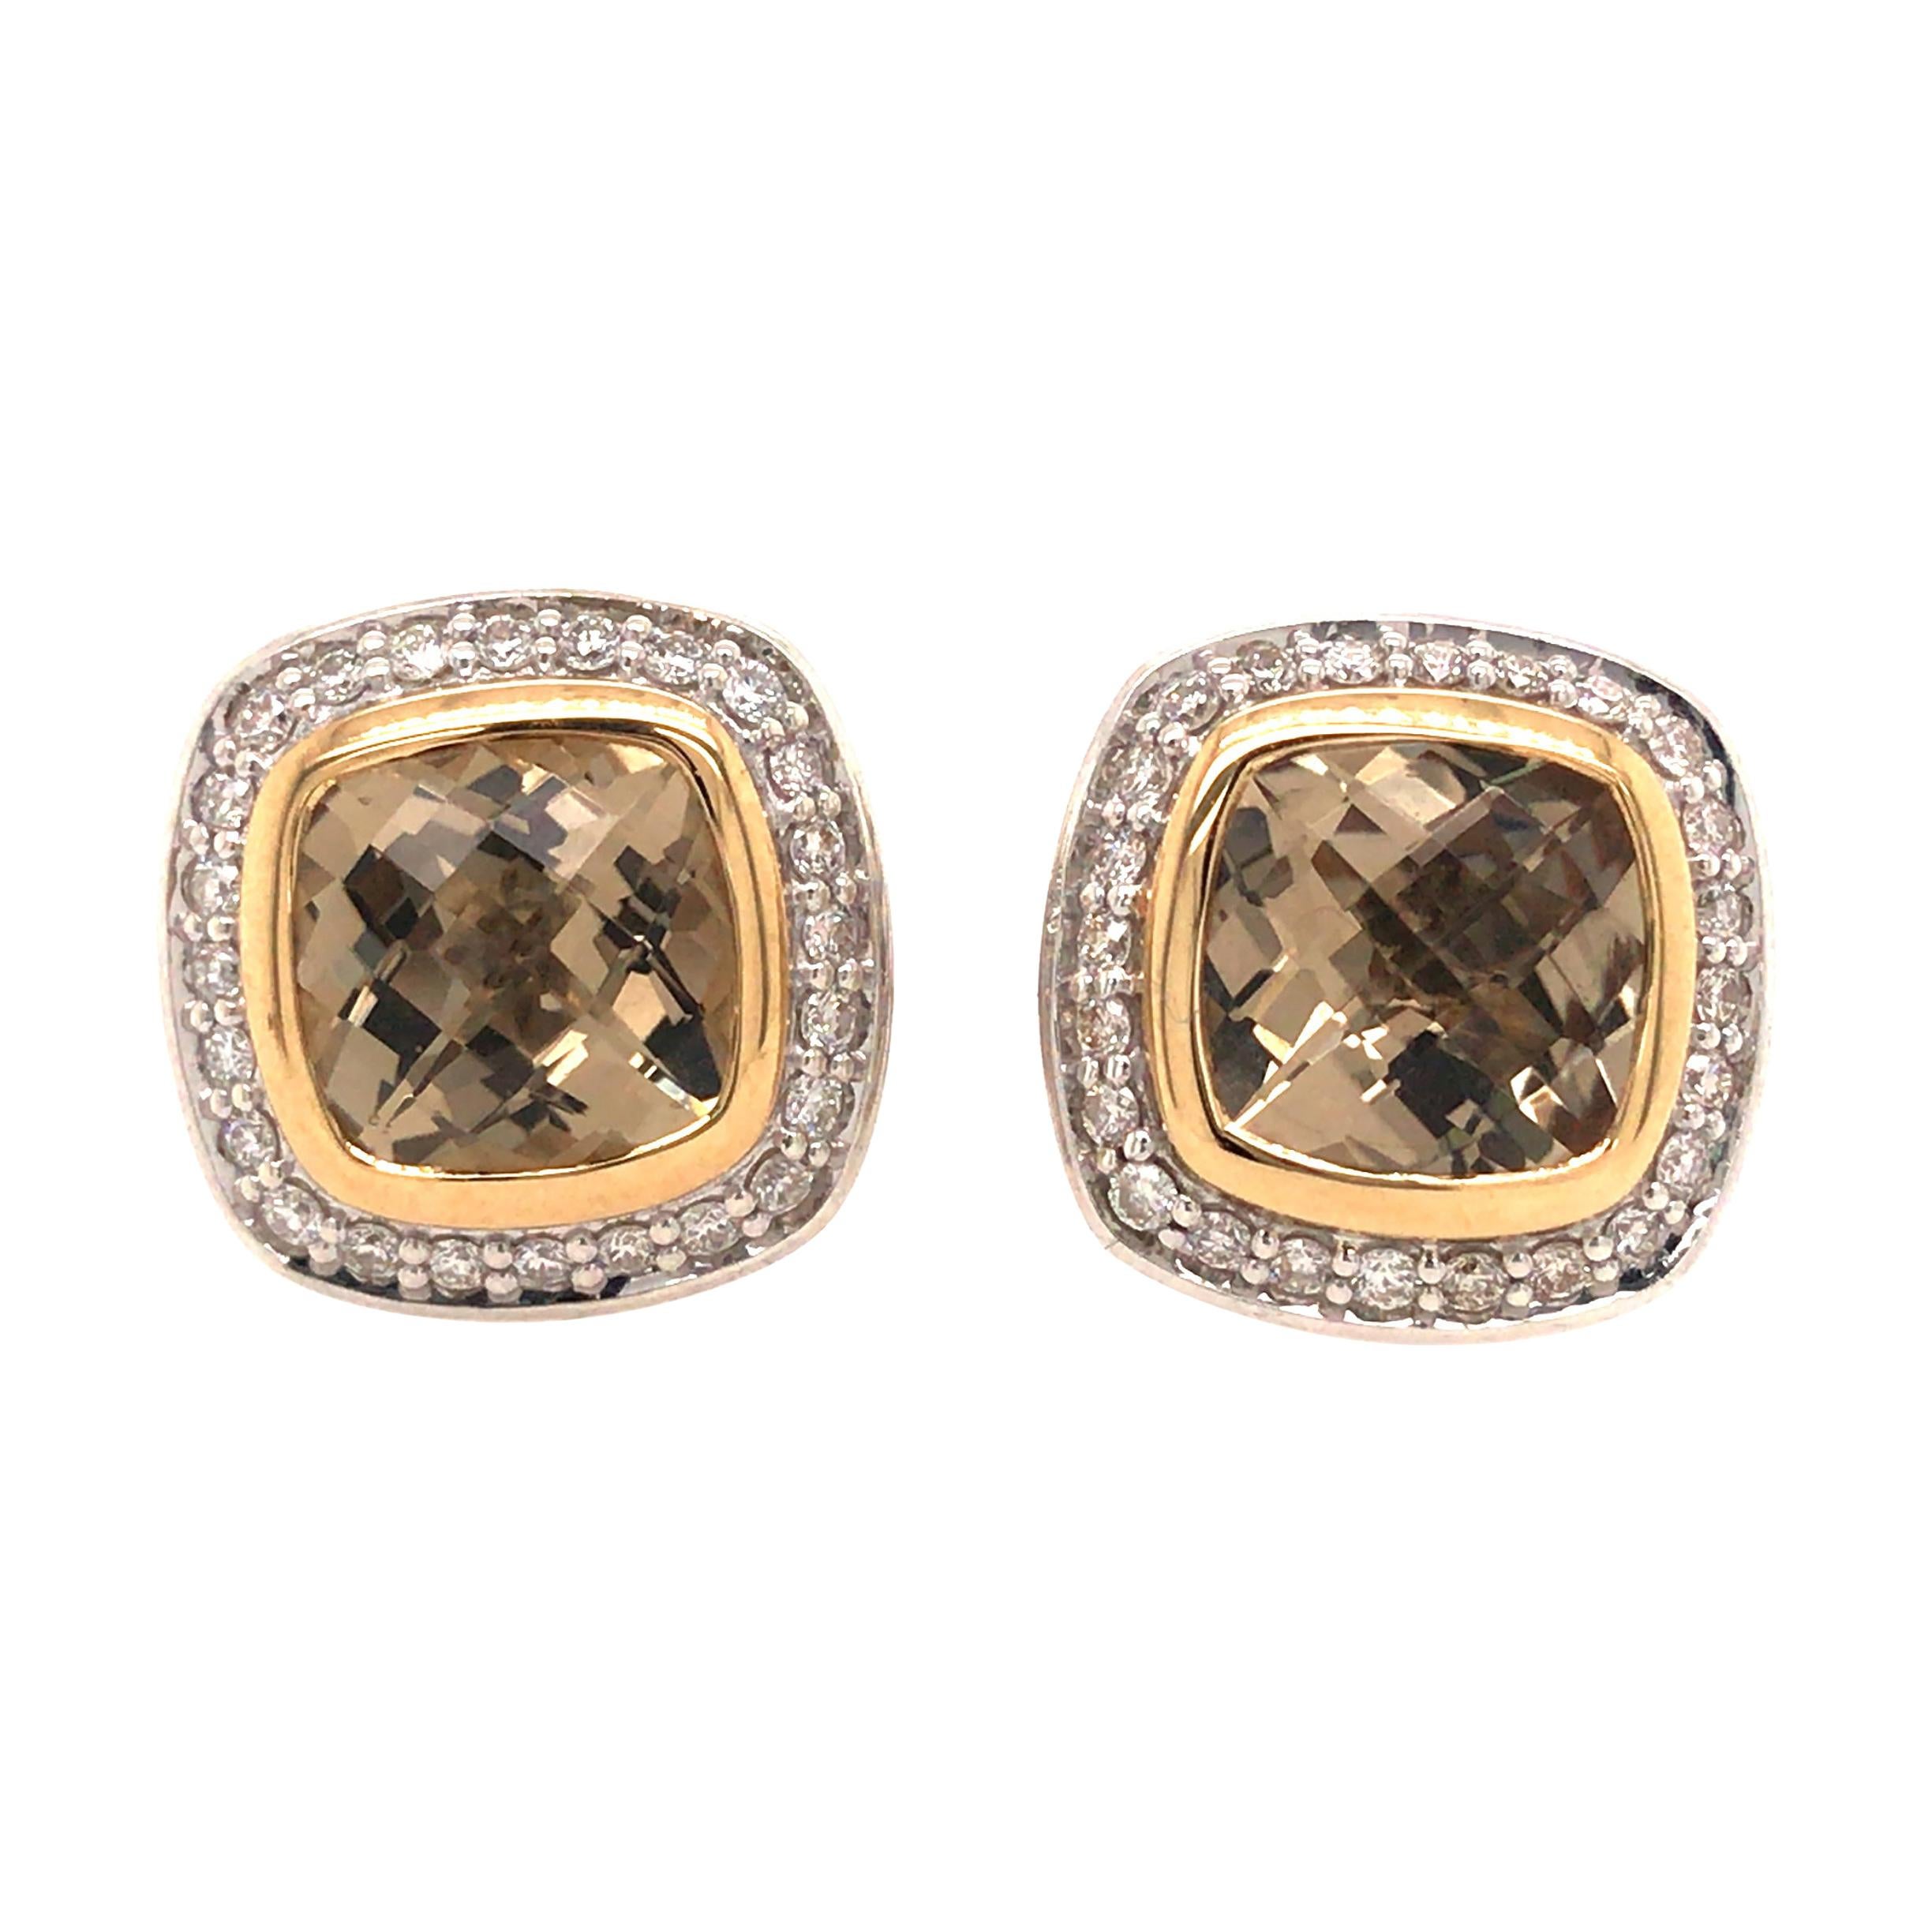 David Yurman Citrine and Diamond Earring in 18K Yellow Gold and Sterling Silver